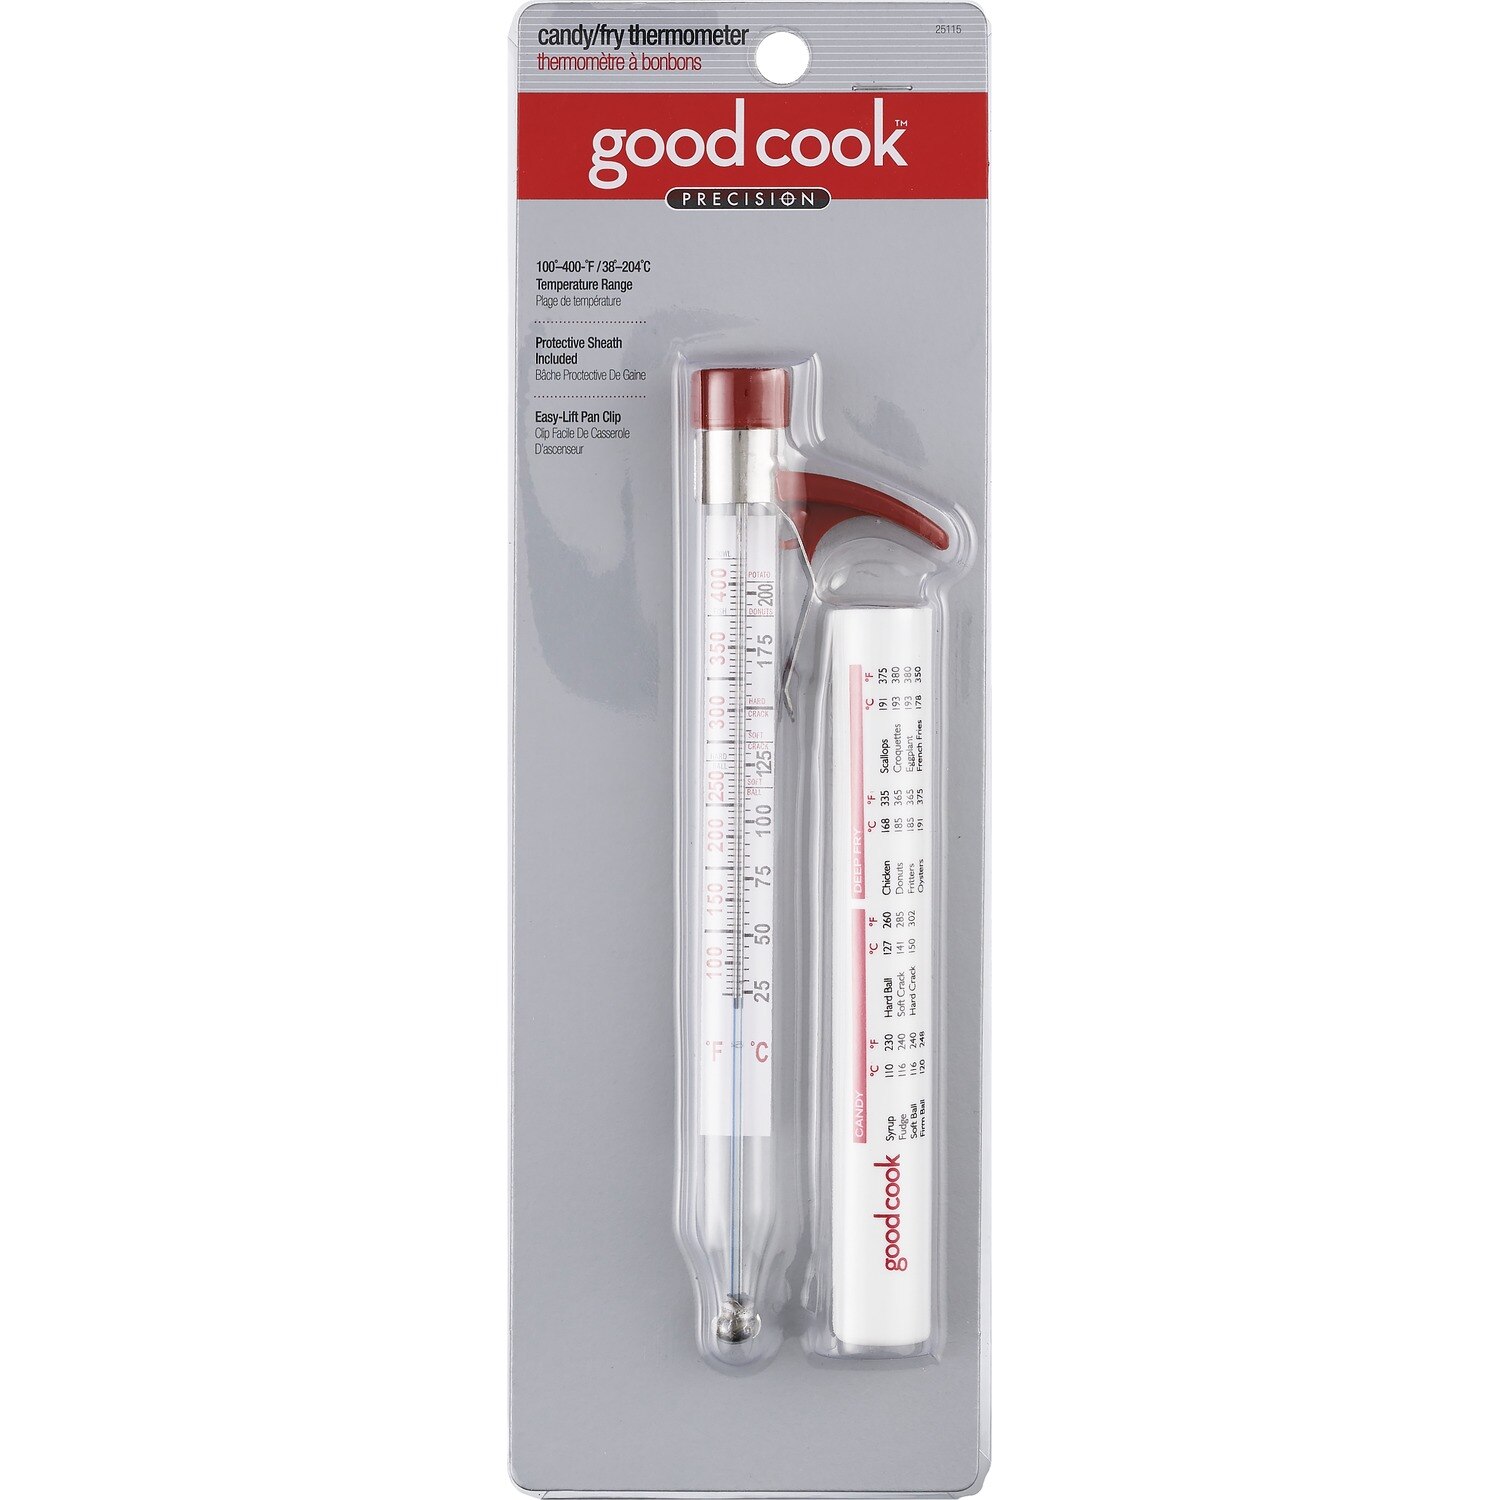 Good Cook Precision Candy/Fry Thermometer